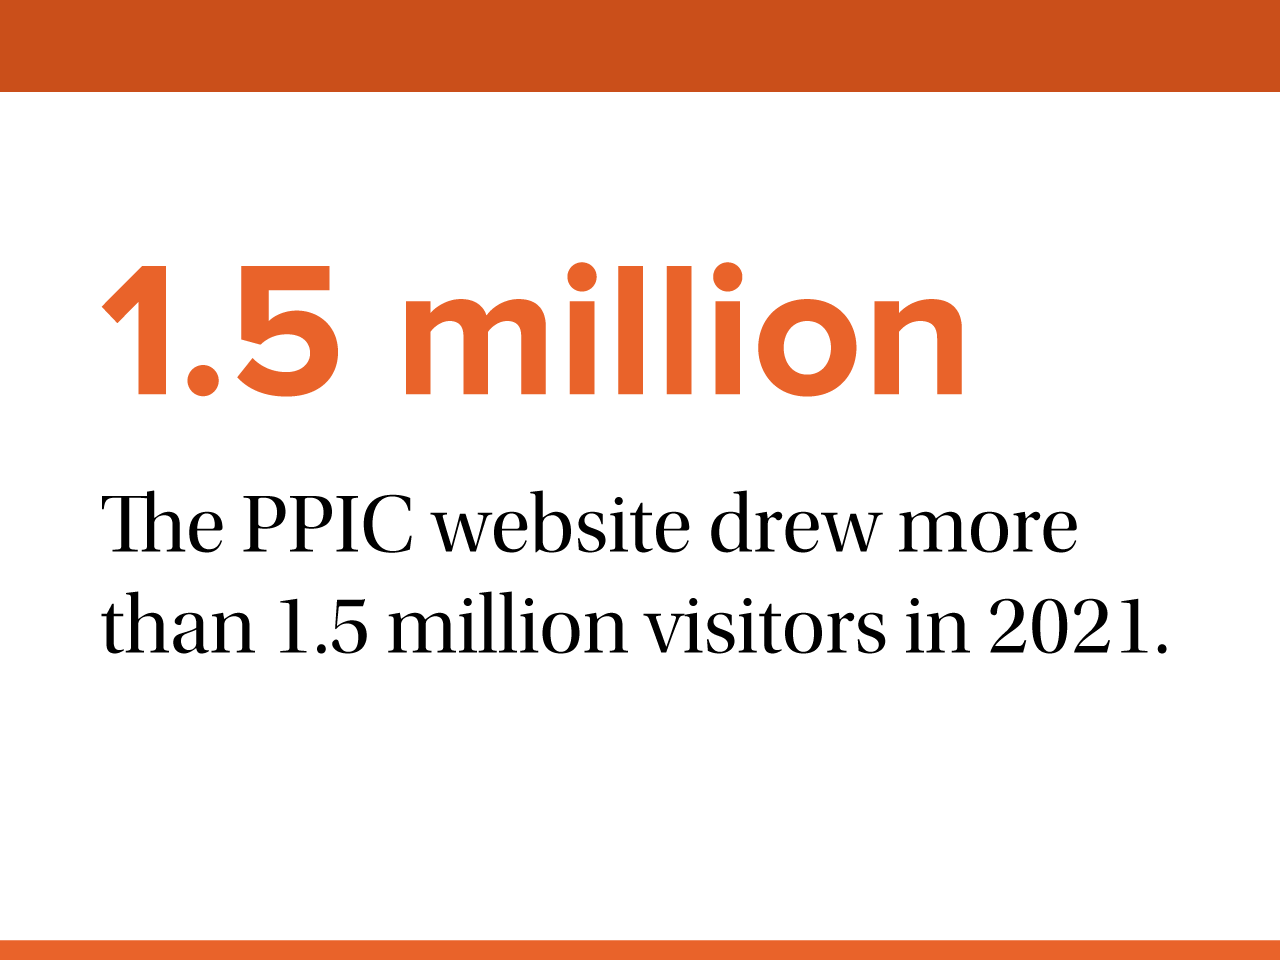 fact - The PPIC website drew more than 1.5 million visitors in 2021.